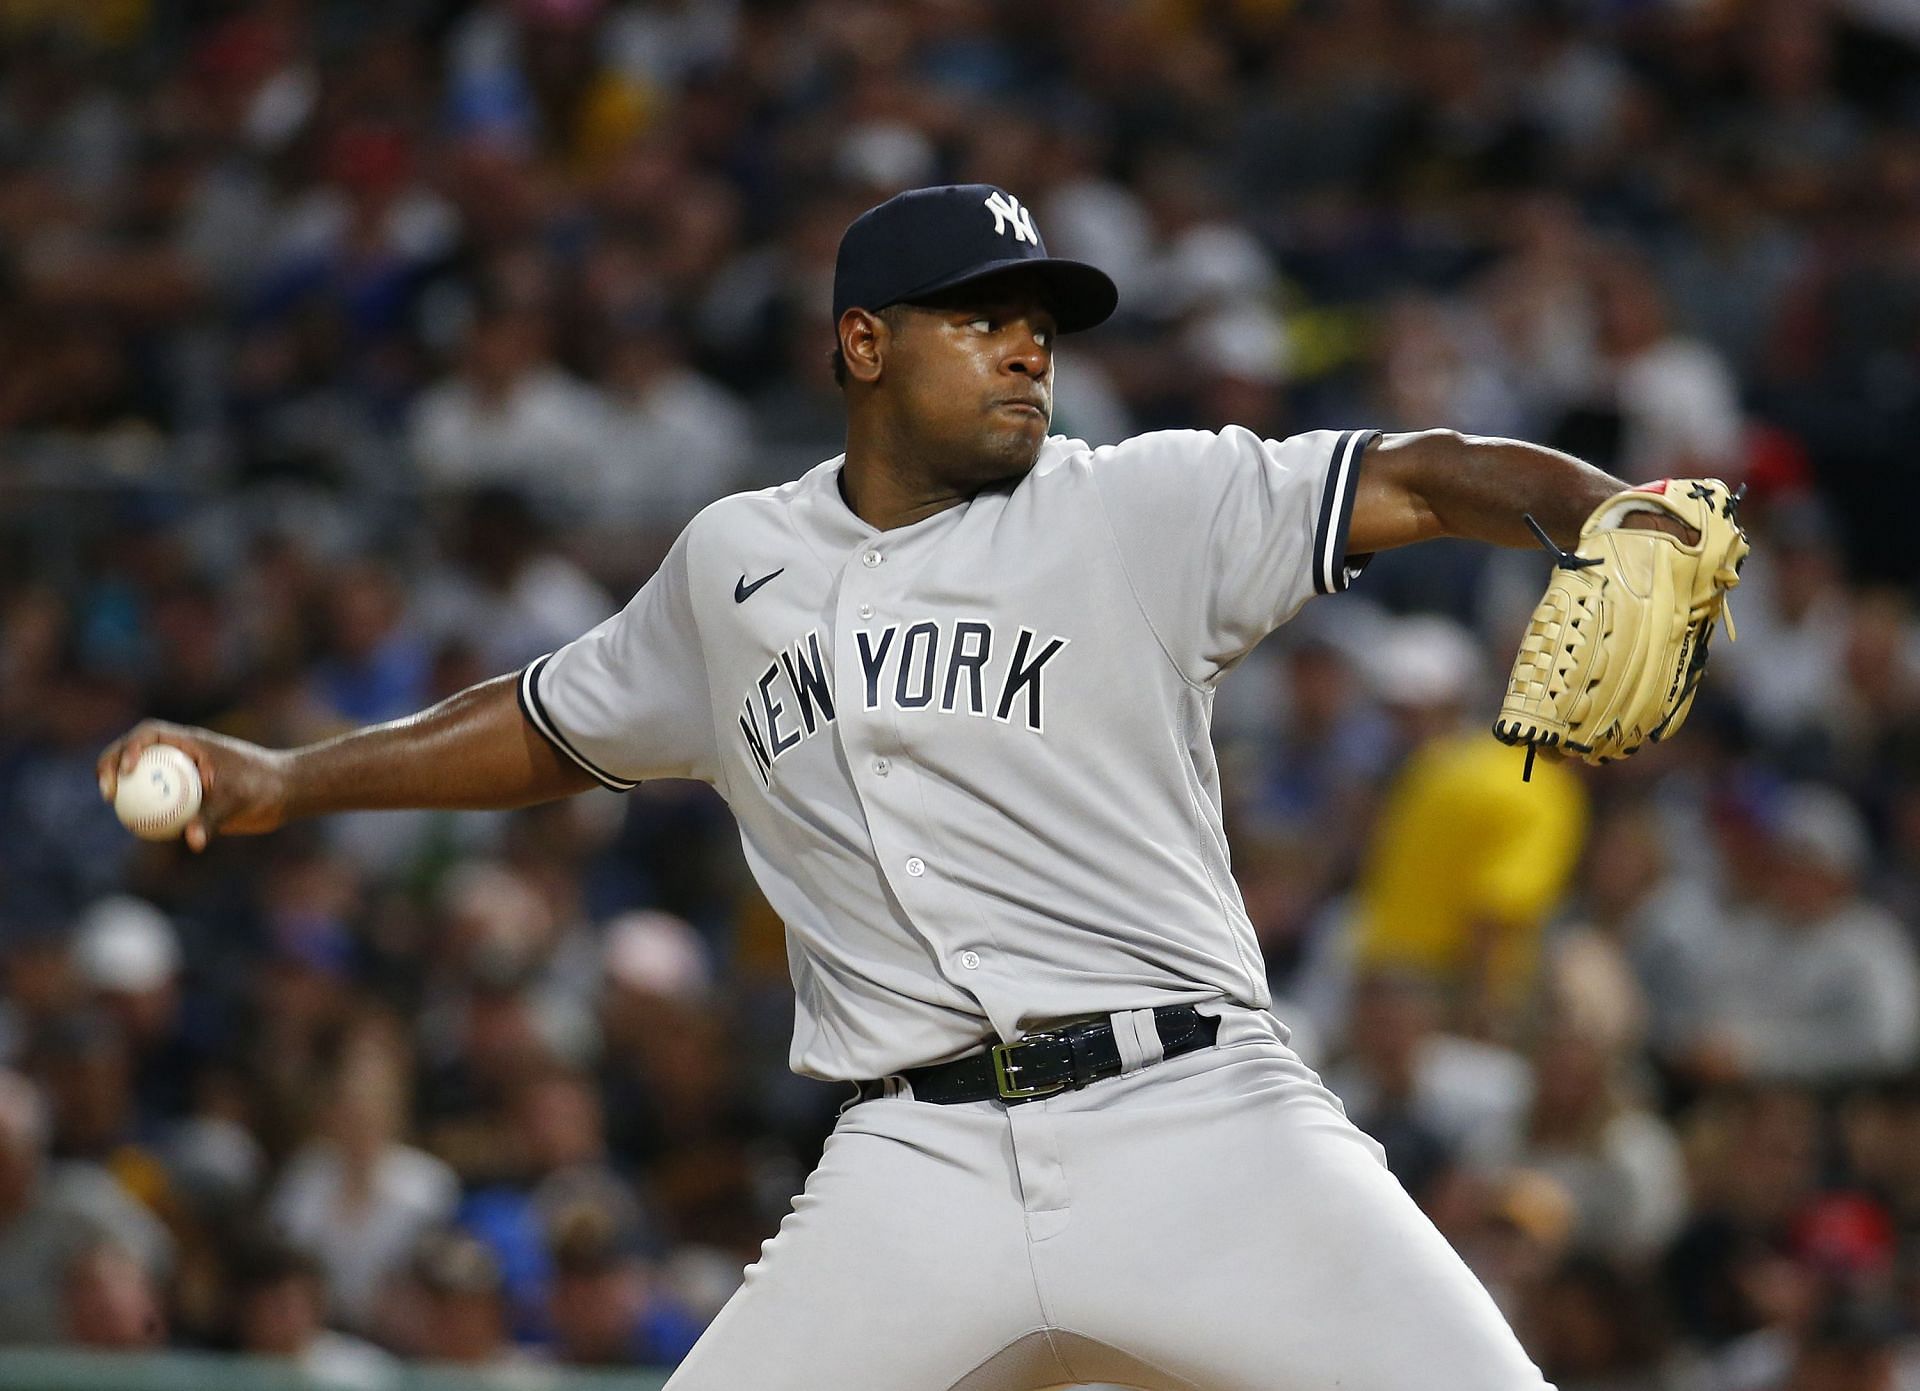 New York Yankees pitcher Luis Severino left the game against the Cincinnati Reds with an injury